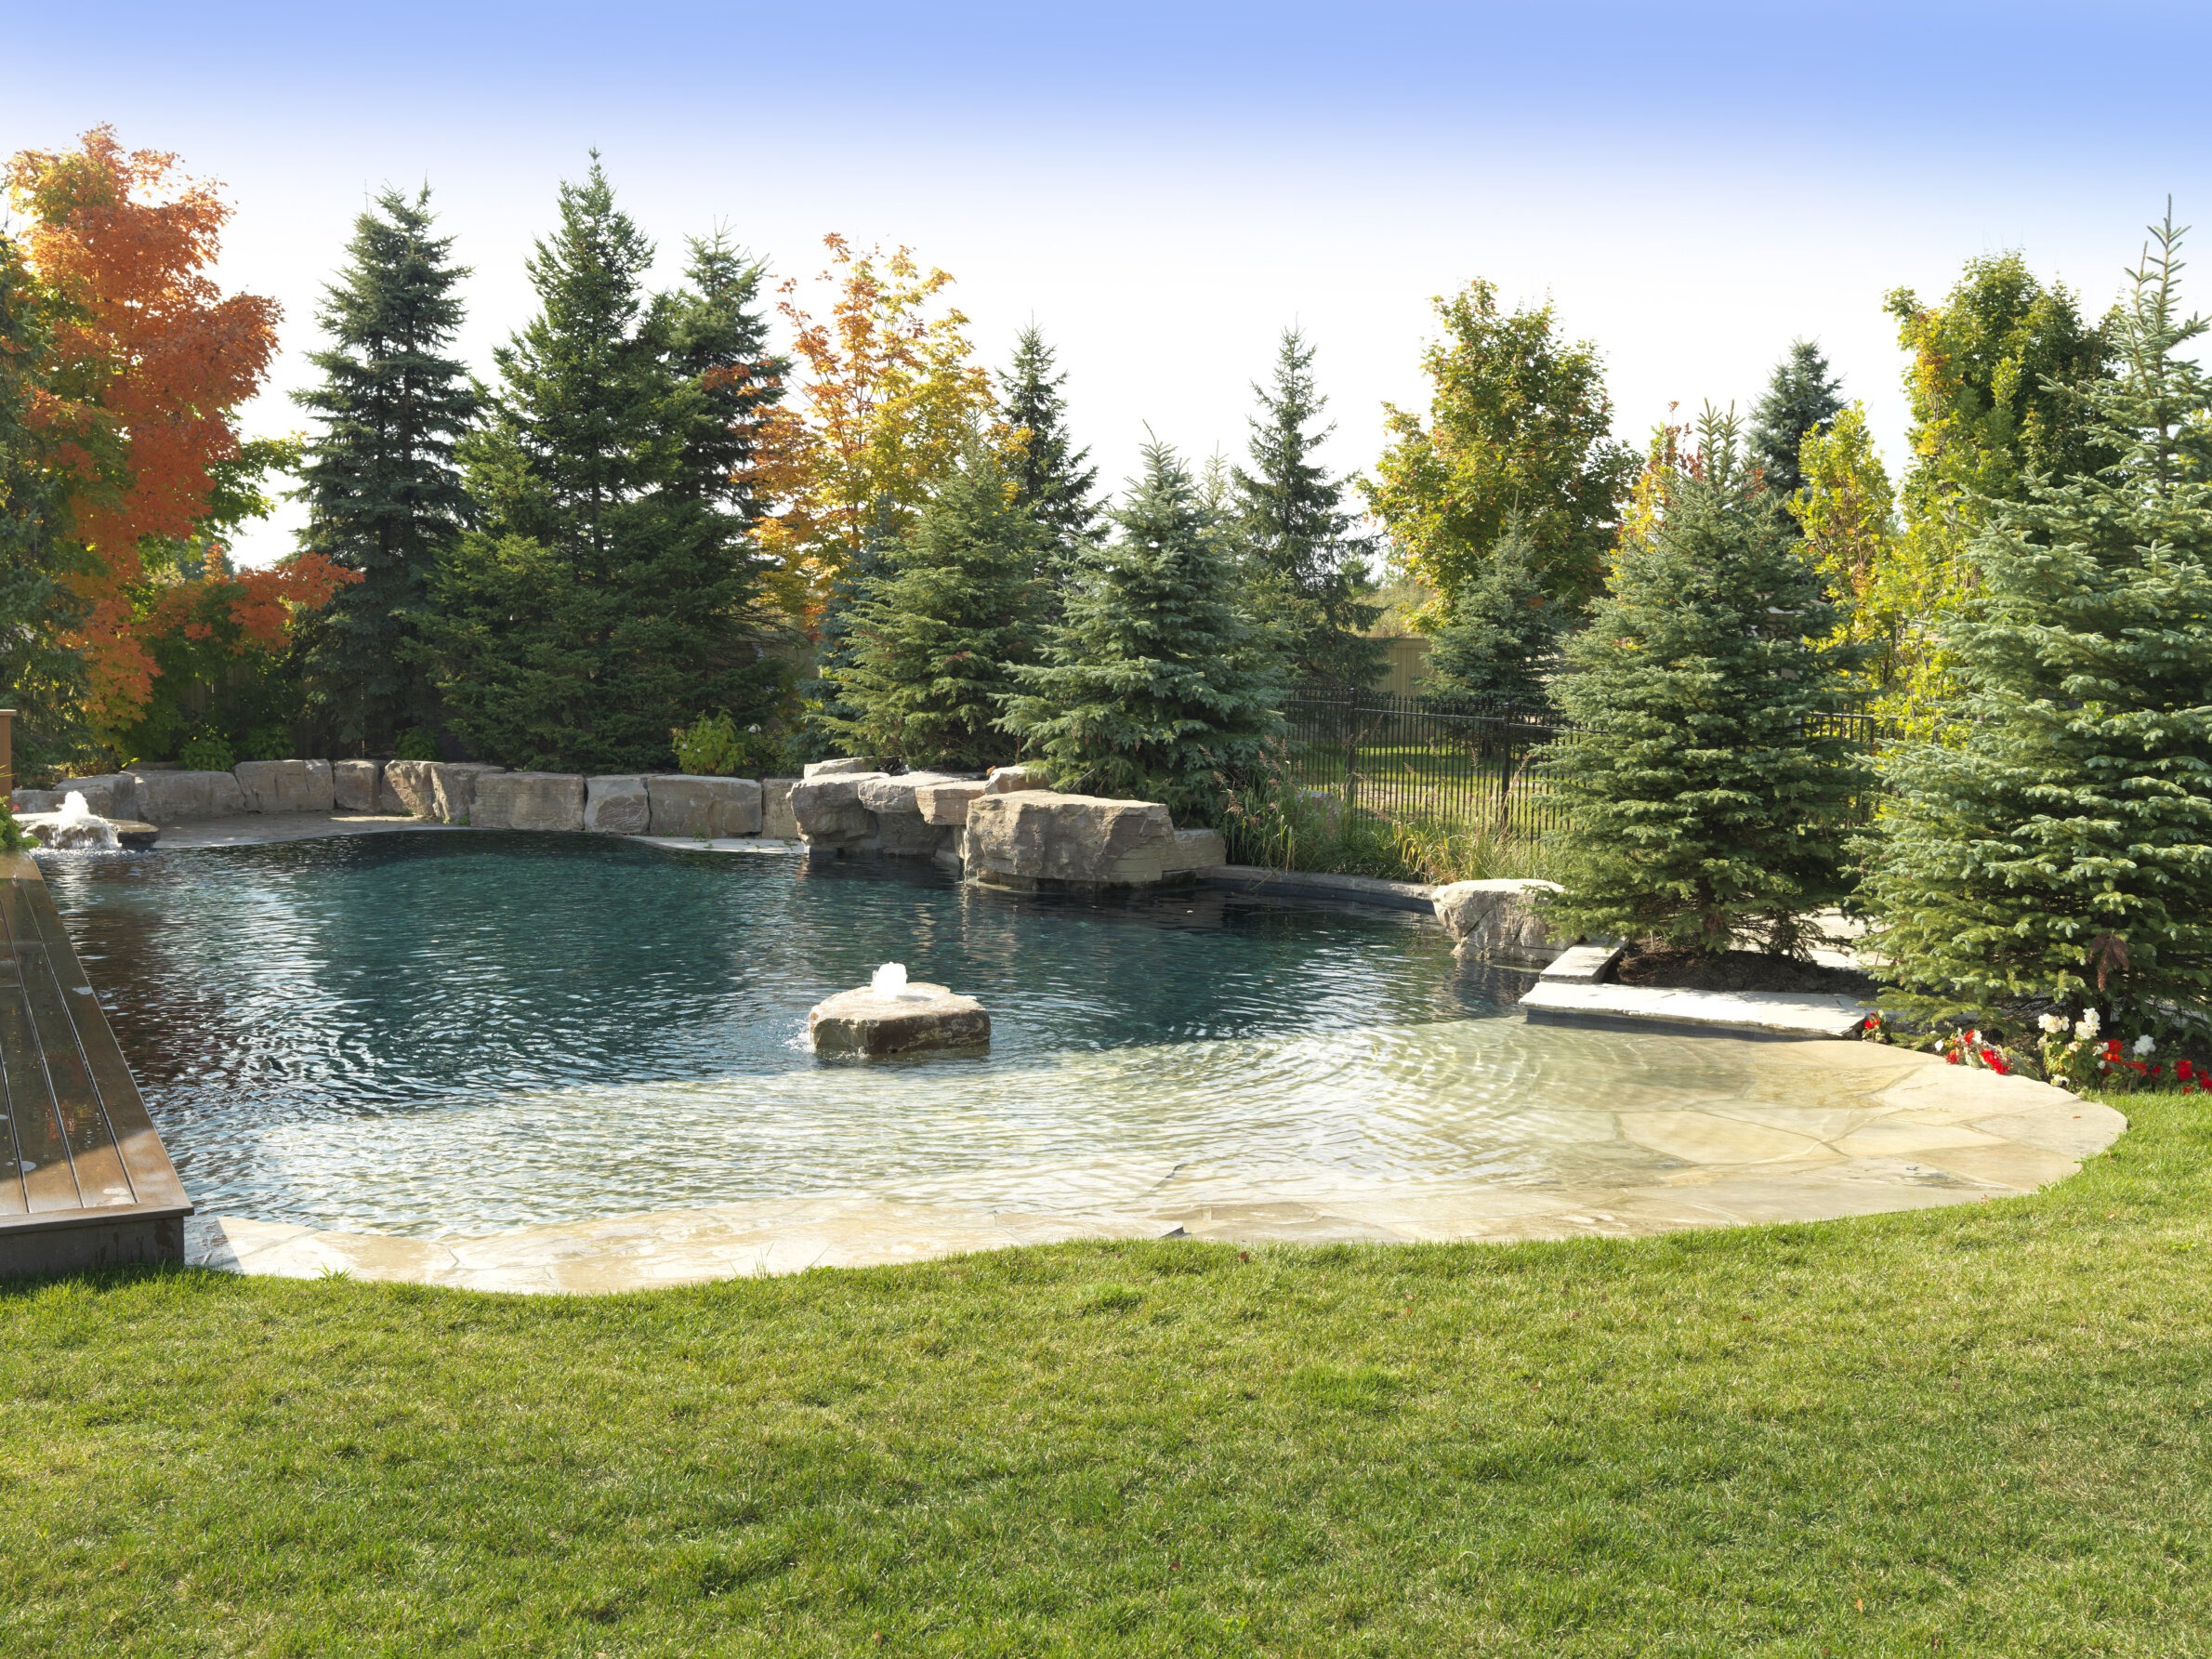 This is an image of an inviting backyard with a natural-looking swimming pool, surrounded by rocks and lush greenery, under a clear blue sky.